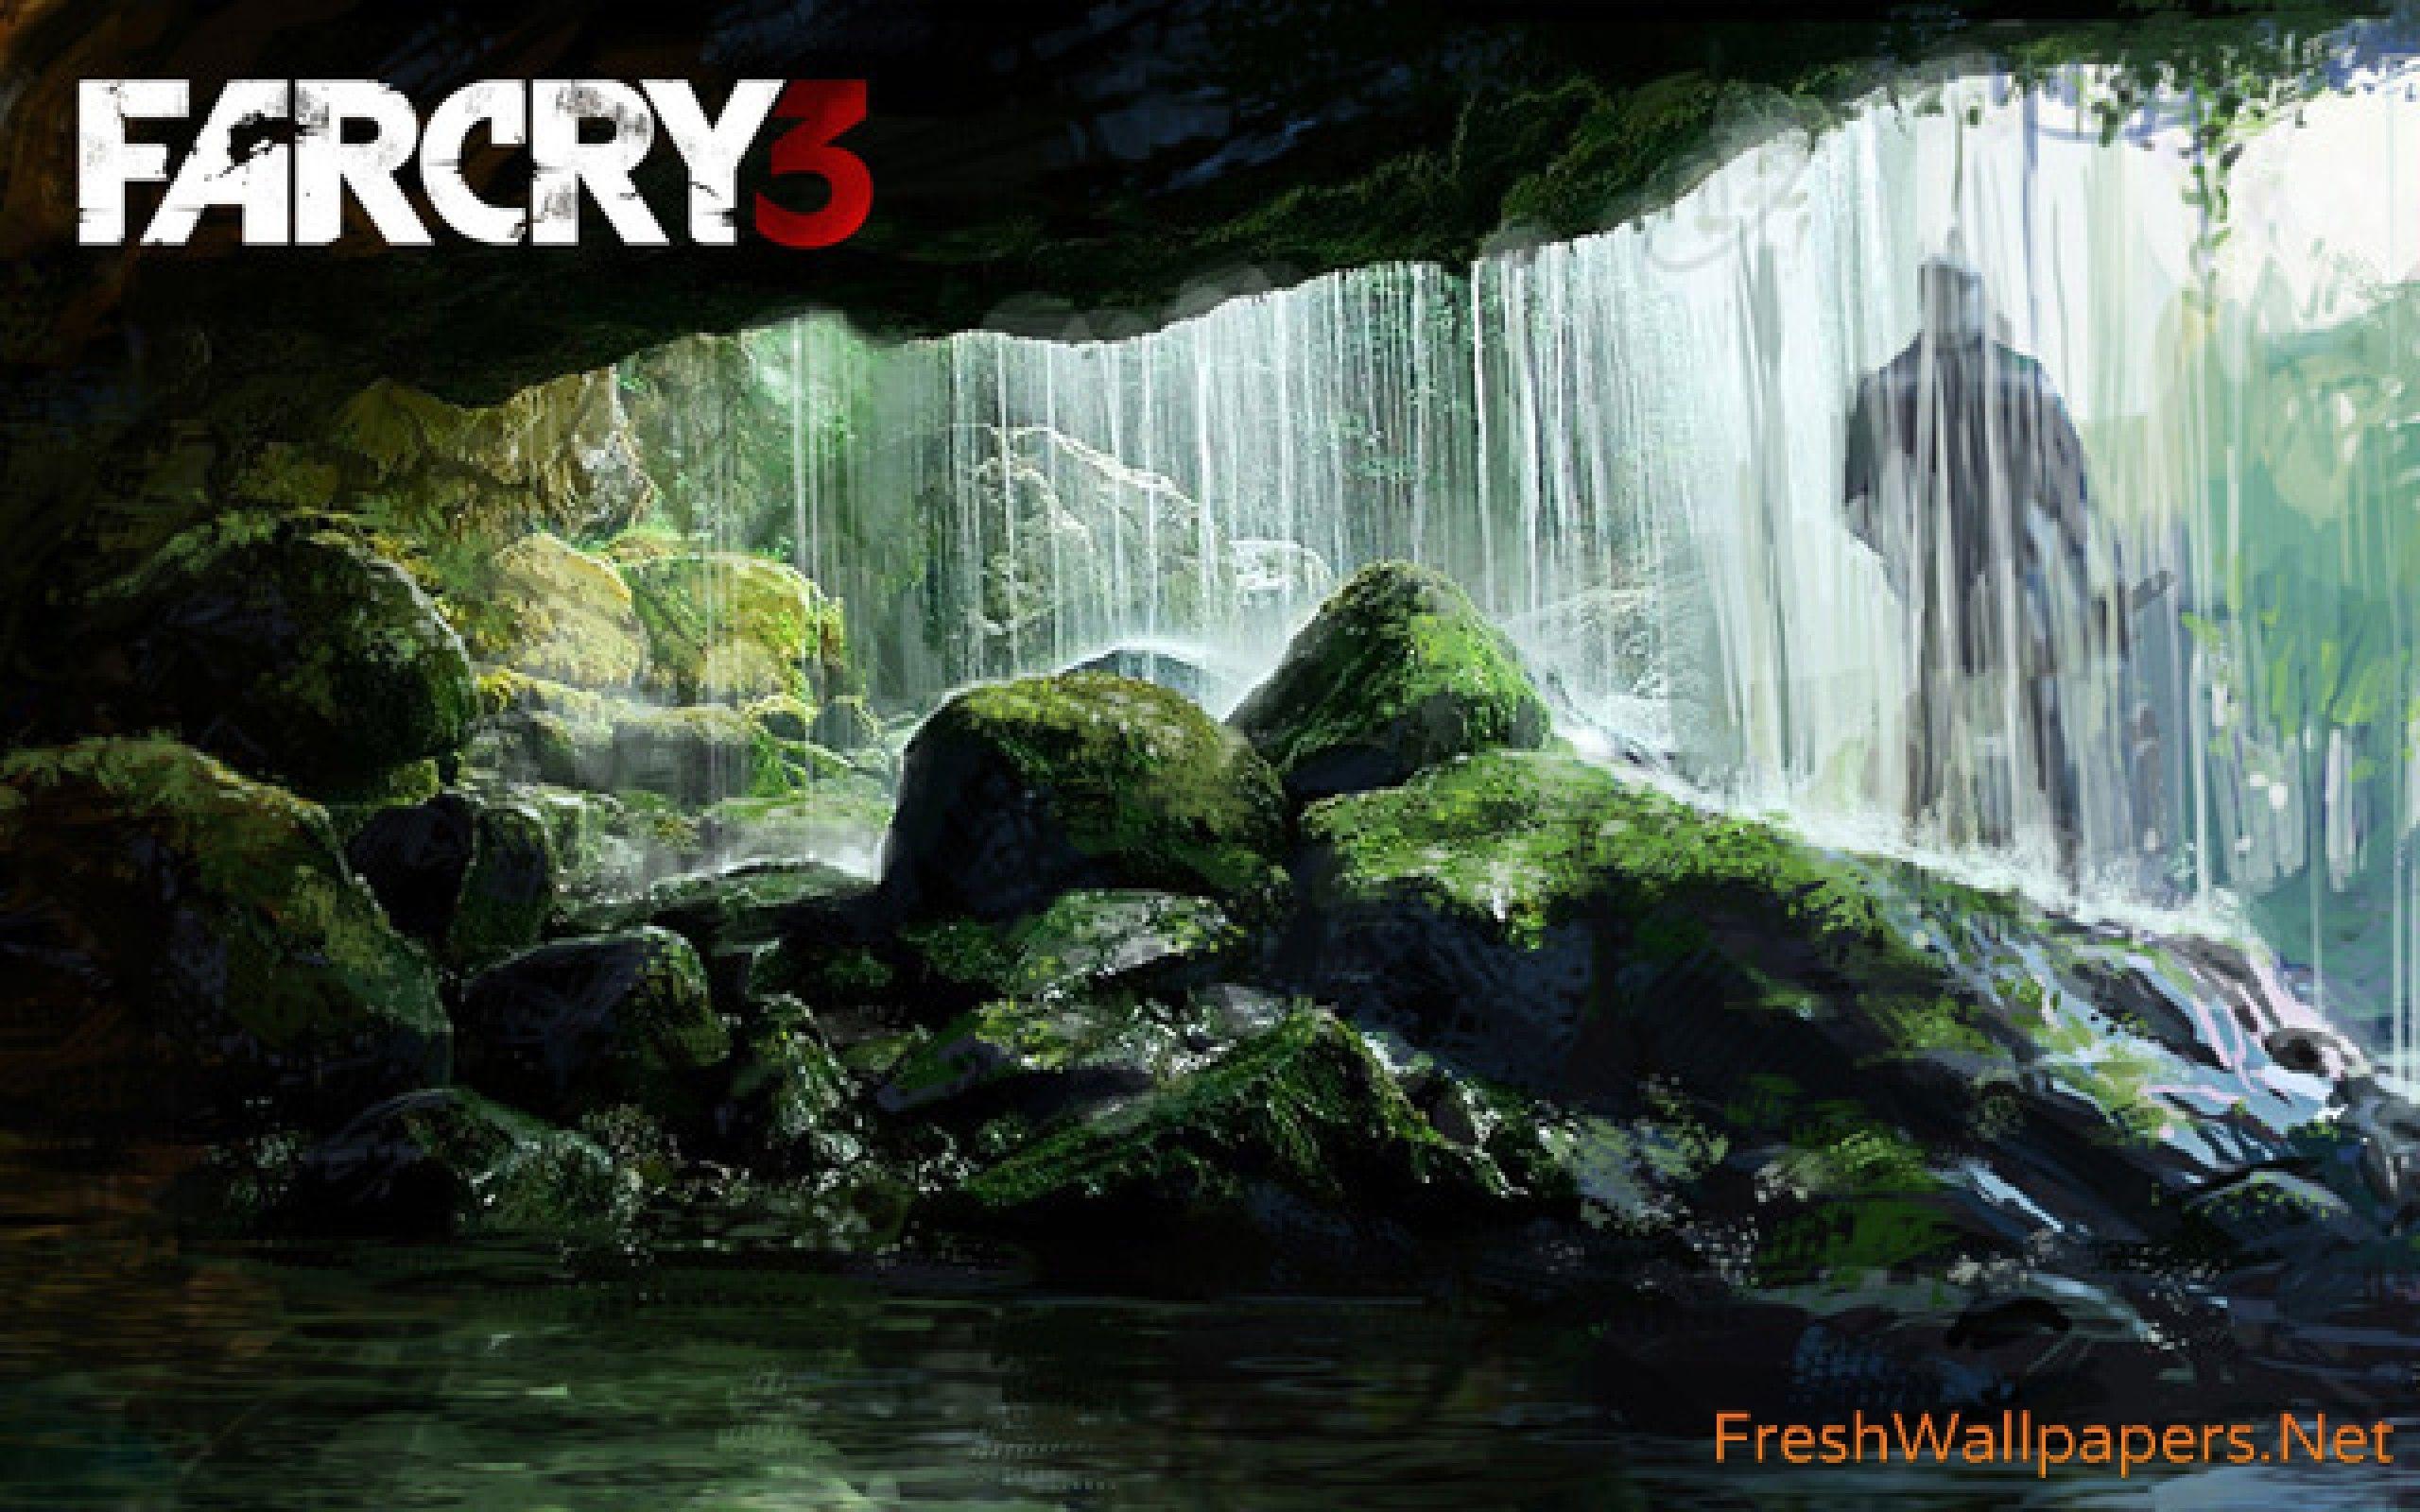 Far Cry 3 Hd wallpapers